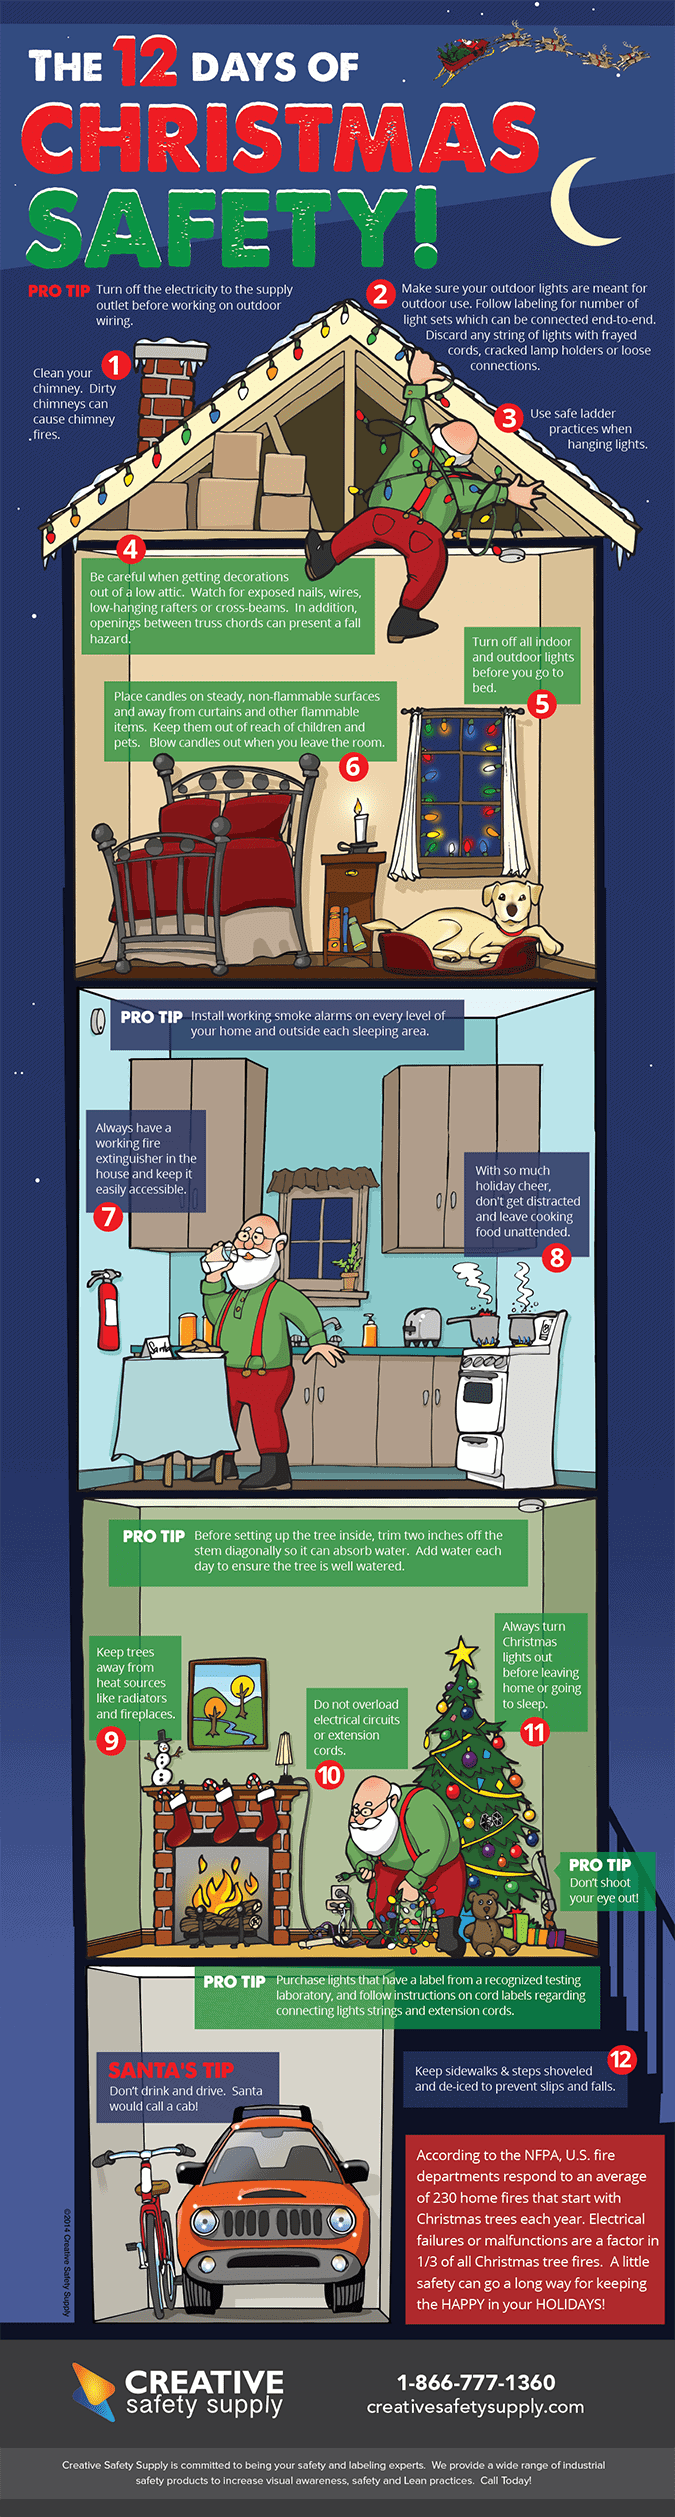 12 days of christmas safety